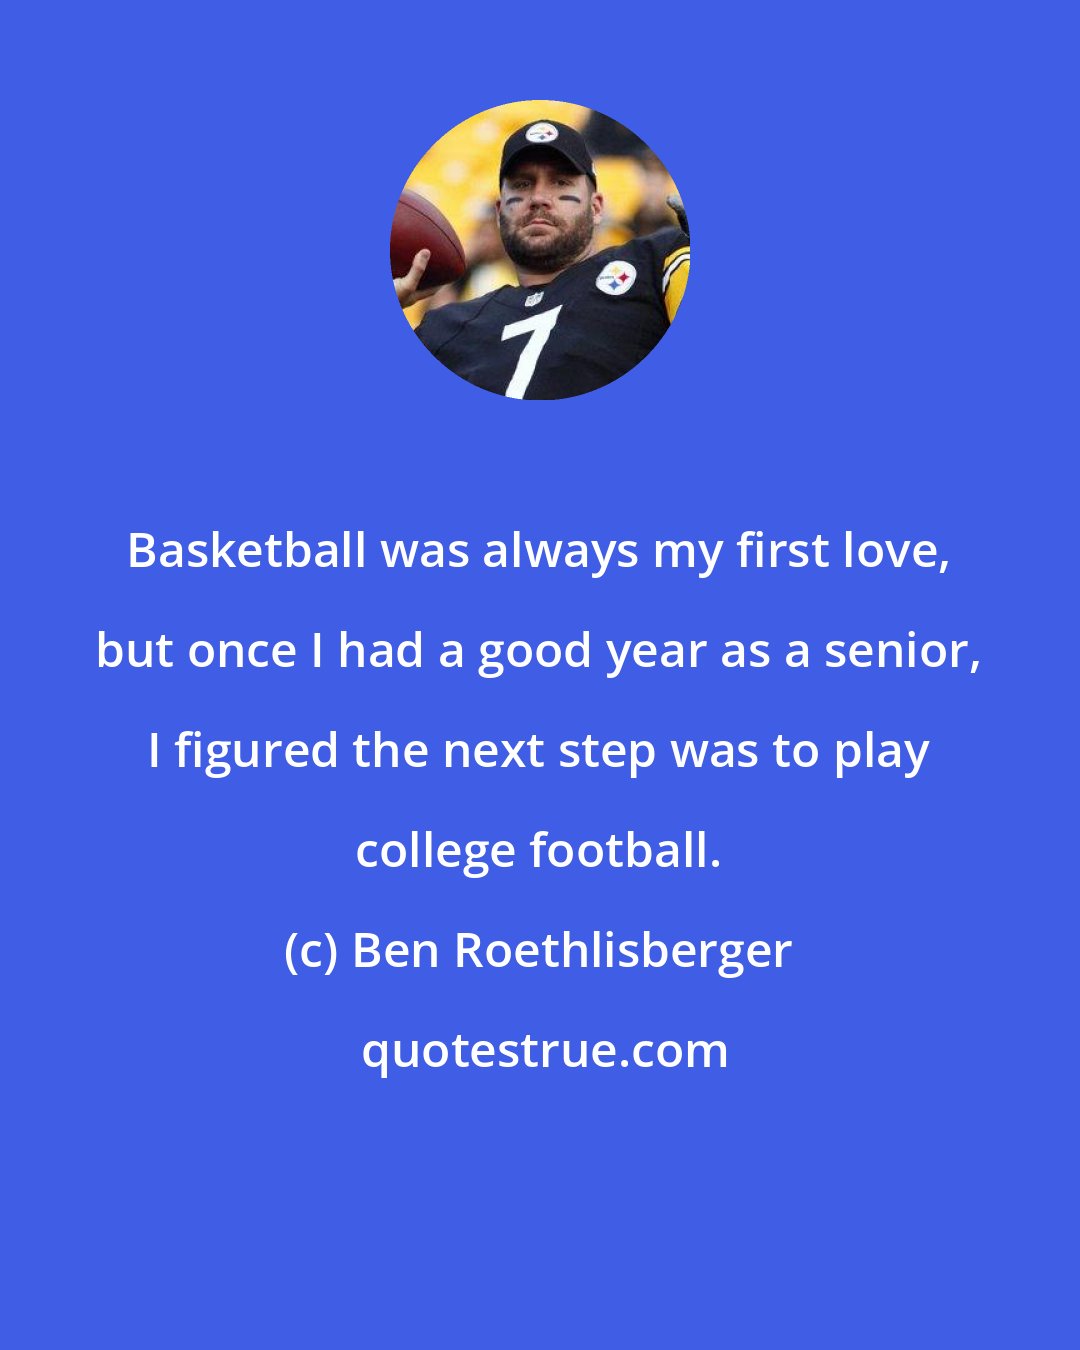 Ben Roethlisberger: Basketball was always my first love, but once I had a good year as a senior, I figured the next step was to play college football.